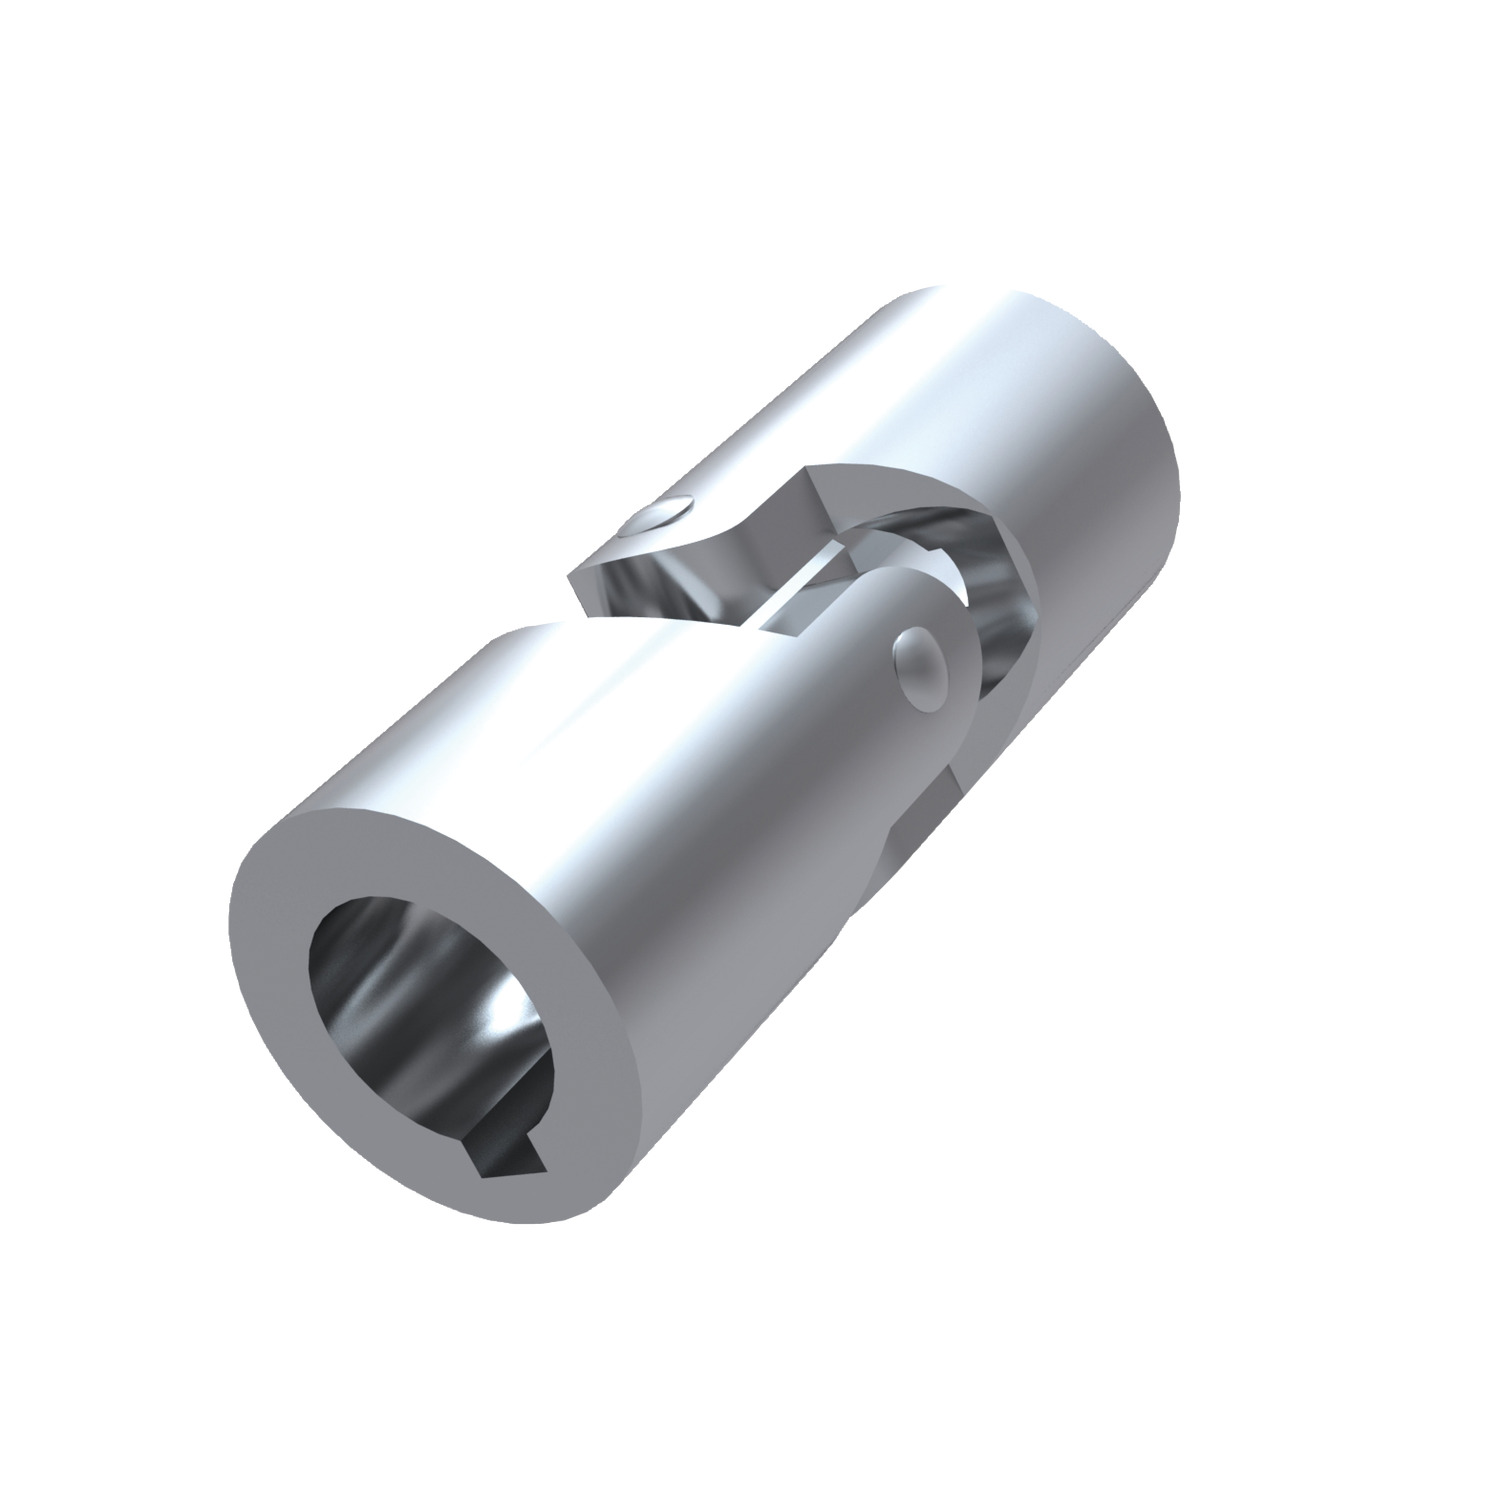 65172.W0035 Sgl Universal Joint - Free cutting St. Round Bore - 35 - 70 - 140